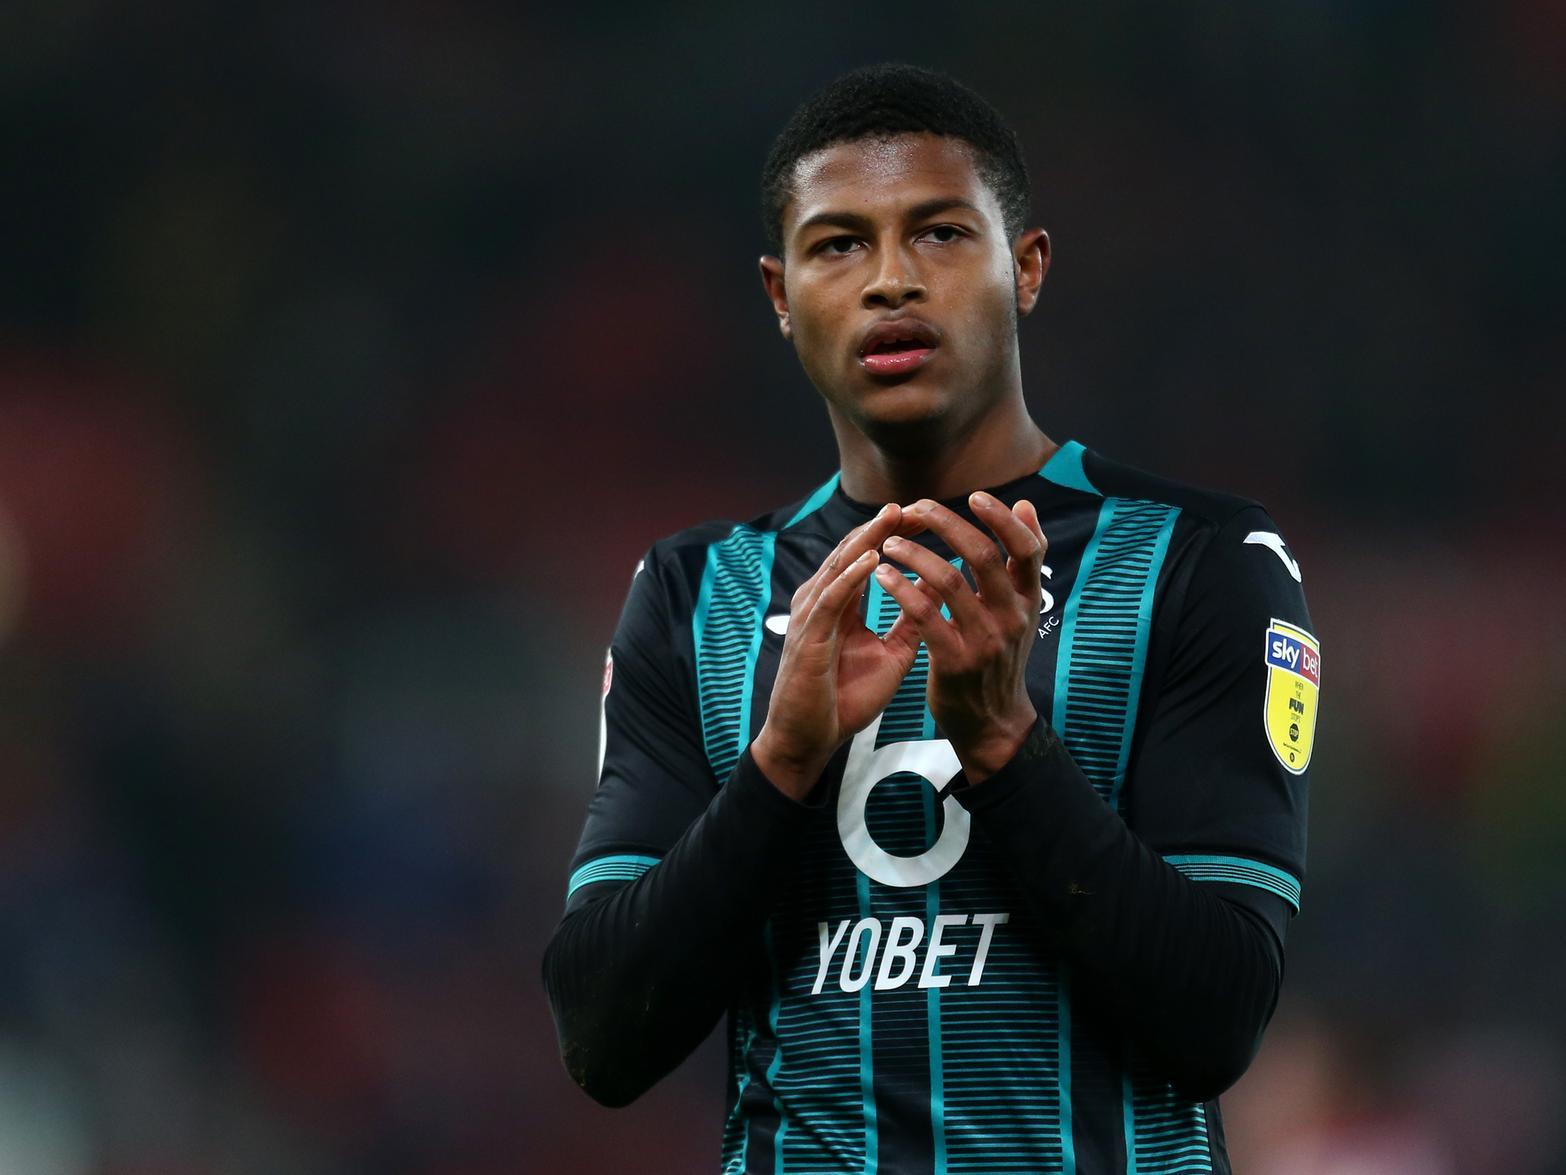 Swansea City loanee Rhian Brewster has made an instant impact after joining the club on loan from Liverpool, winning the club's goal of the month competition at the first time of asking. (Club official website)